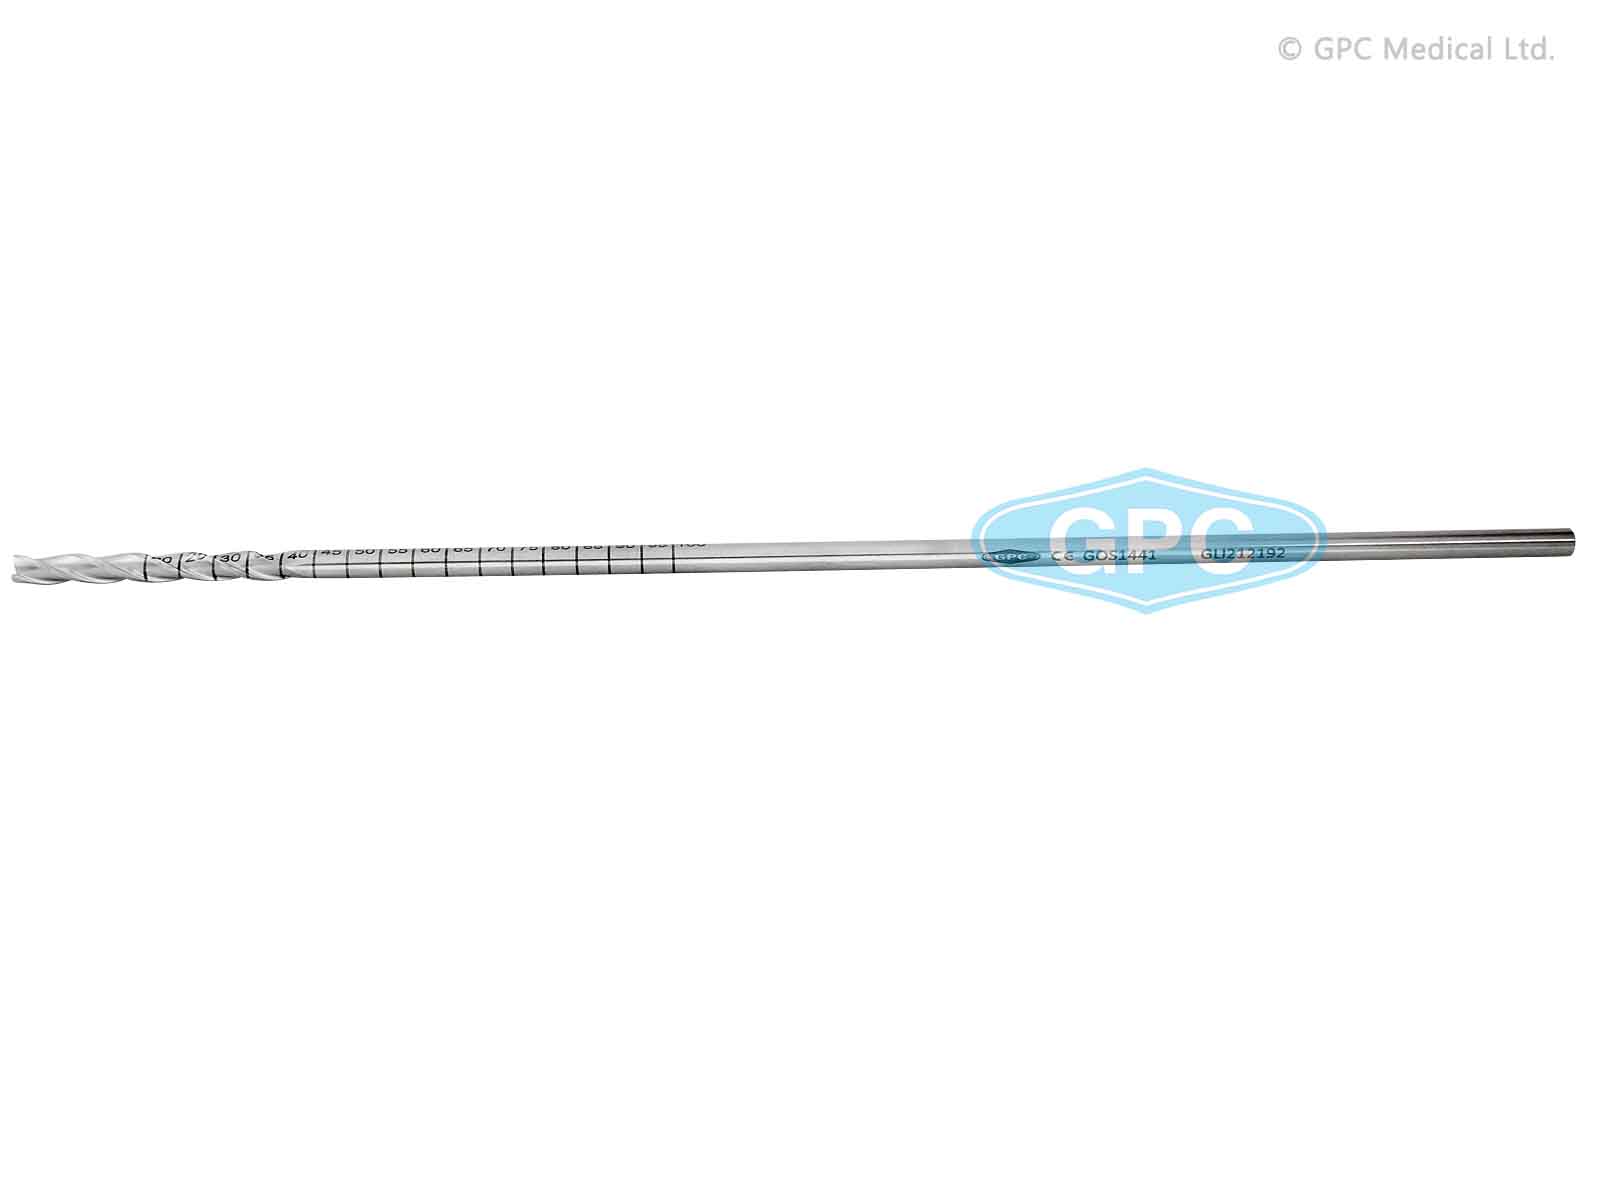 Cannulated Endoscopic Reamer